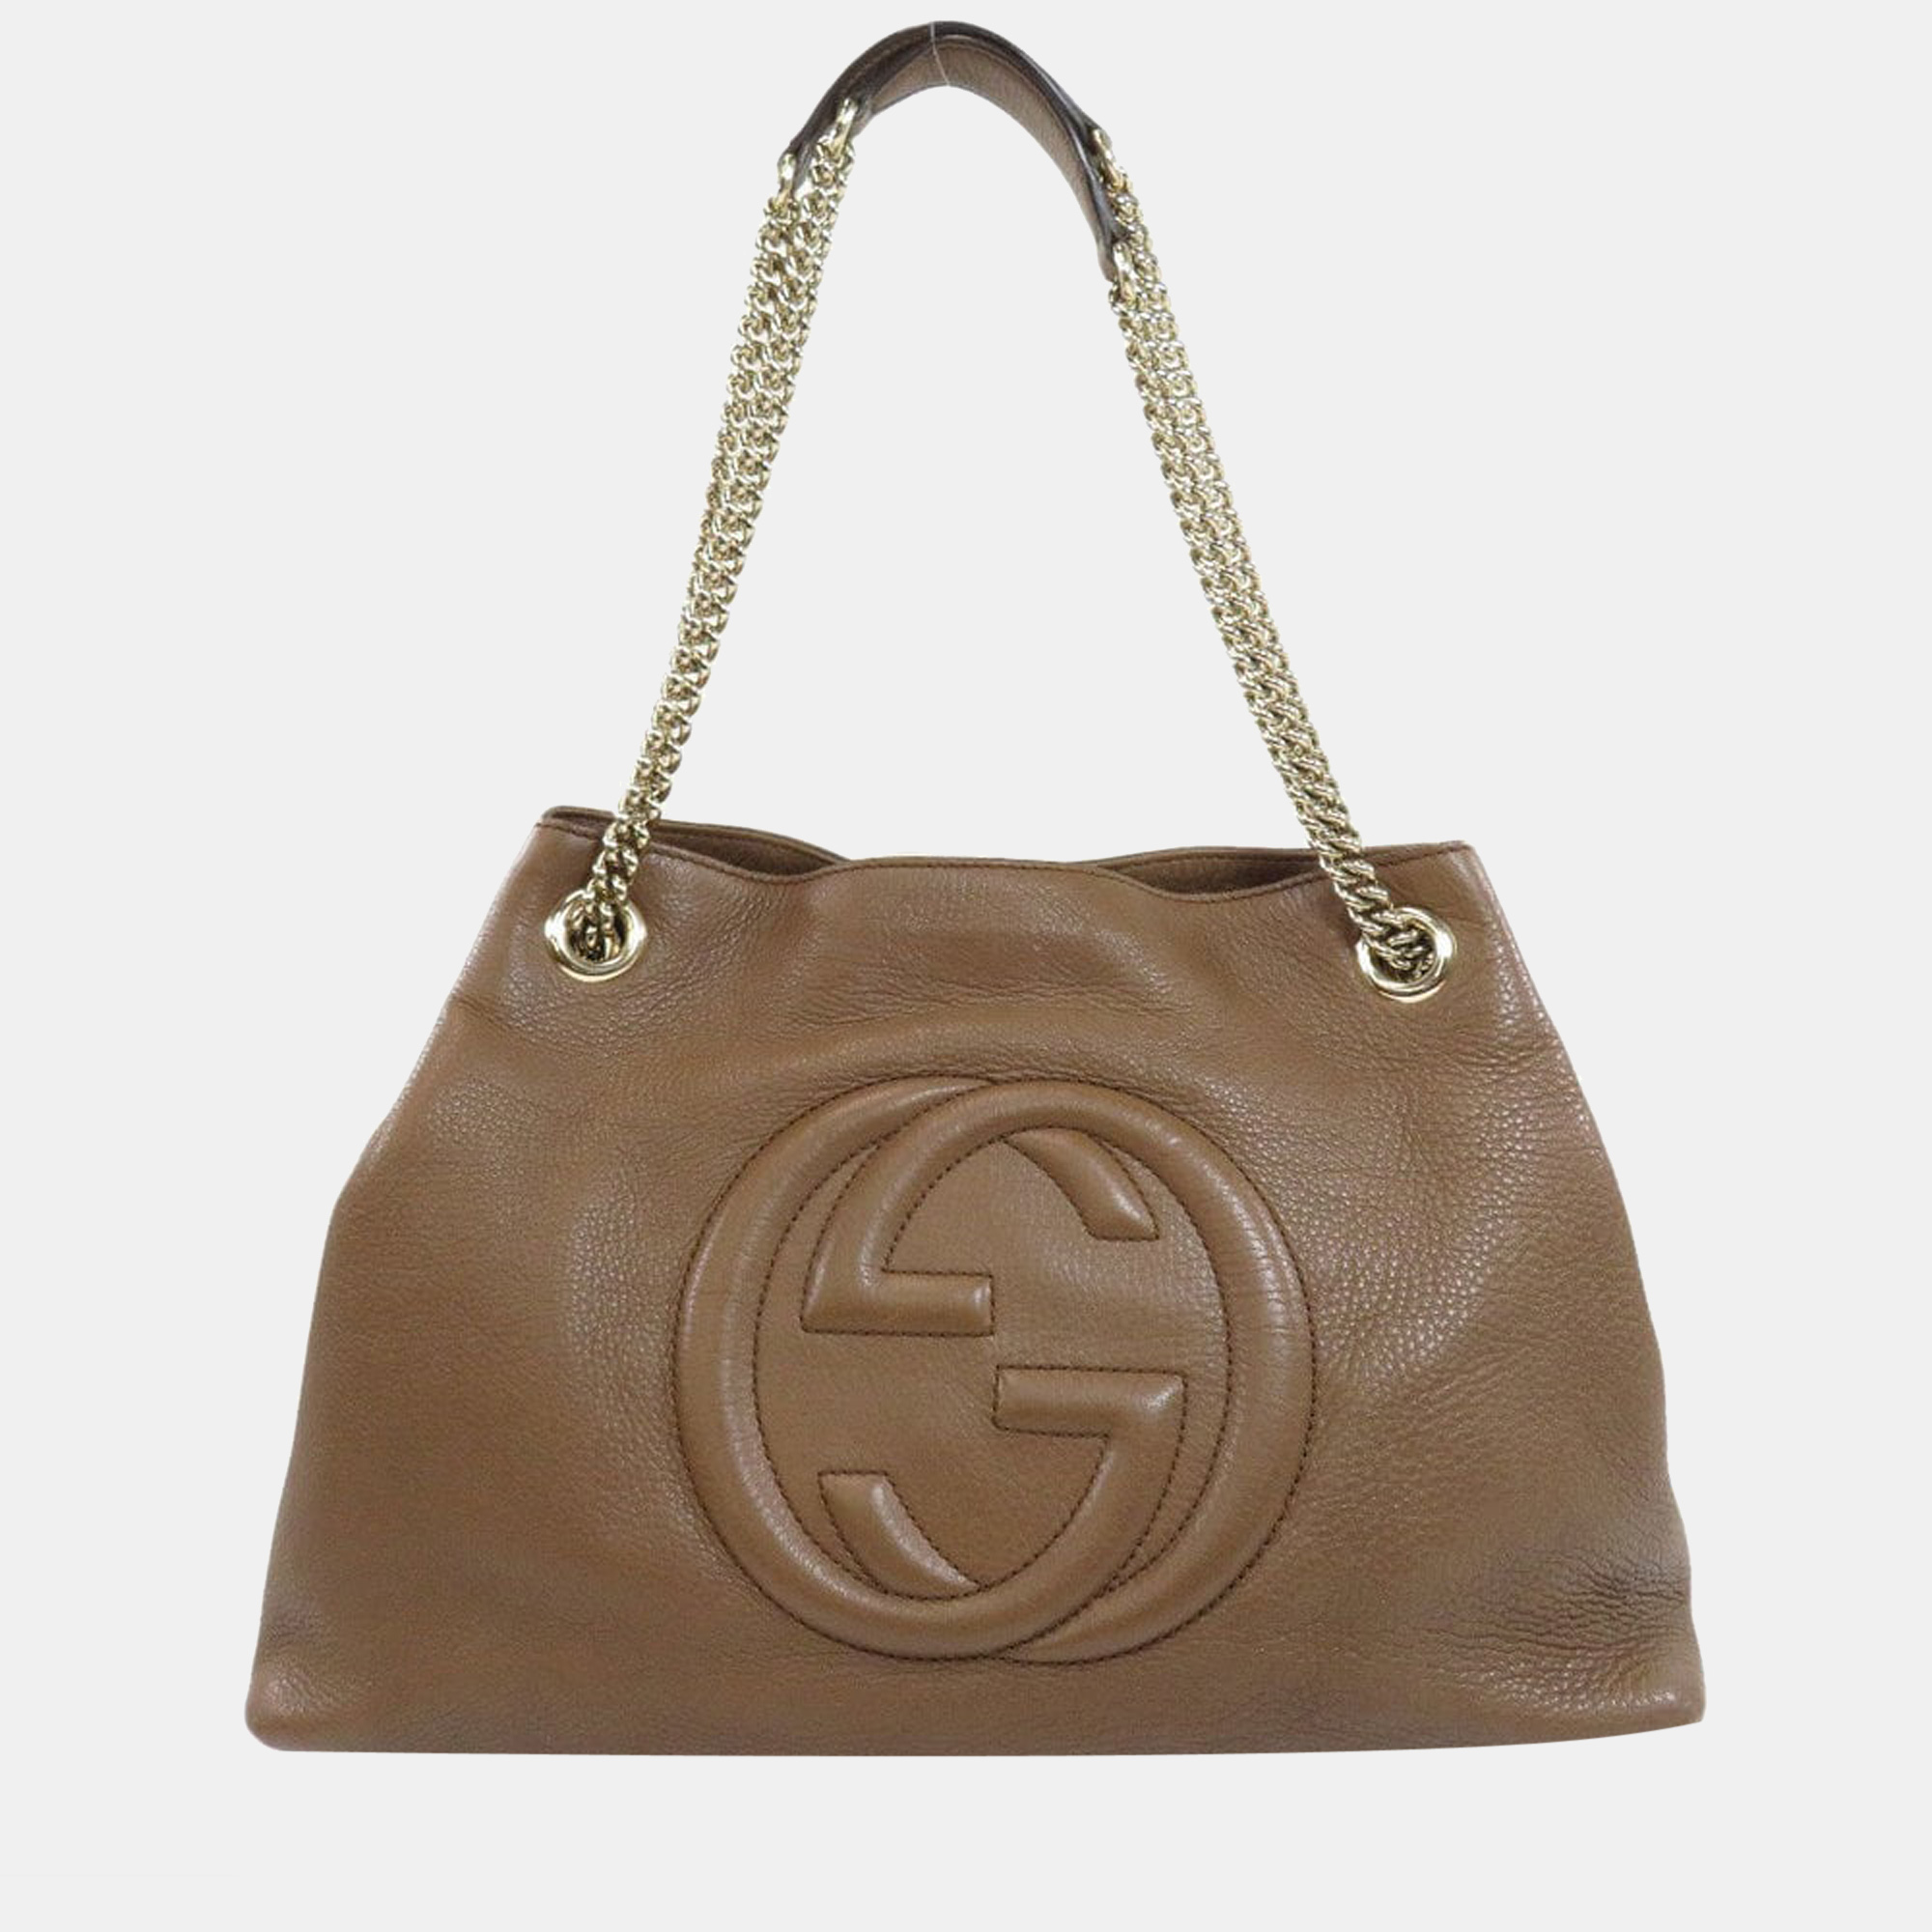 Pre-owned Gucci Brown Leather Medium Chain Soho Shoulder Bag